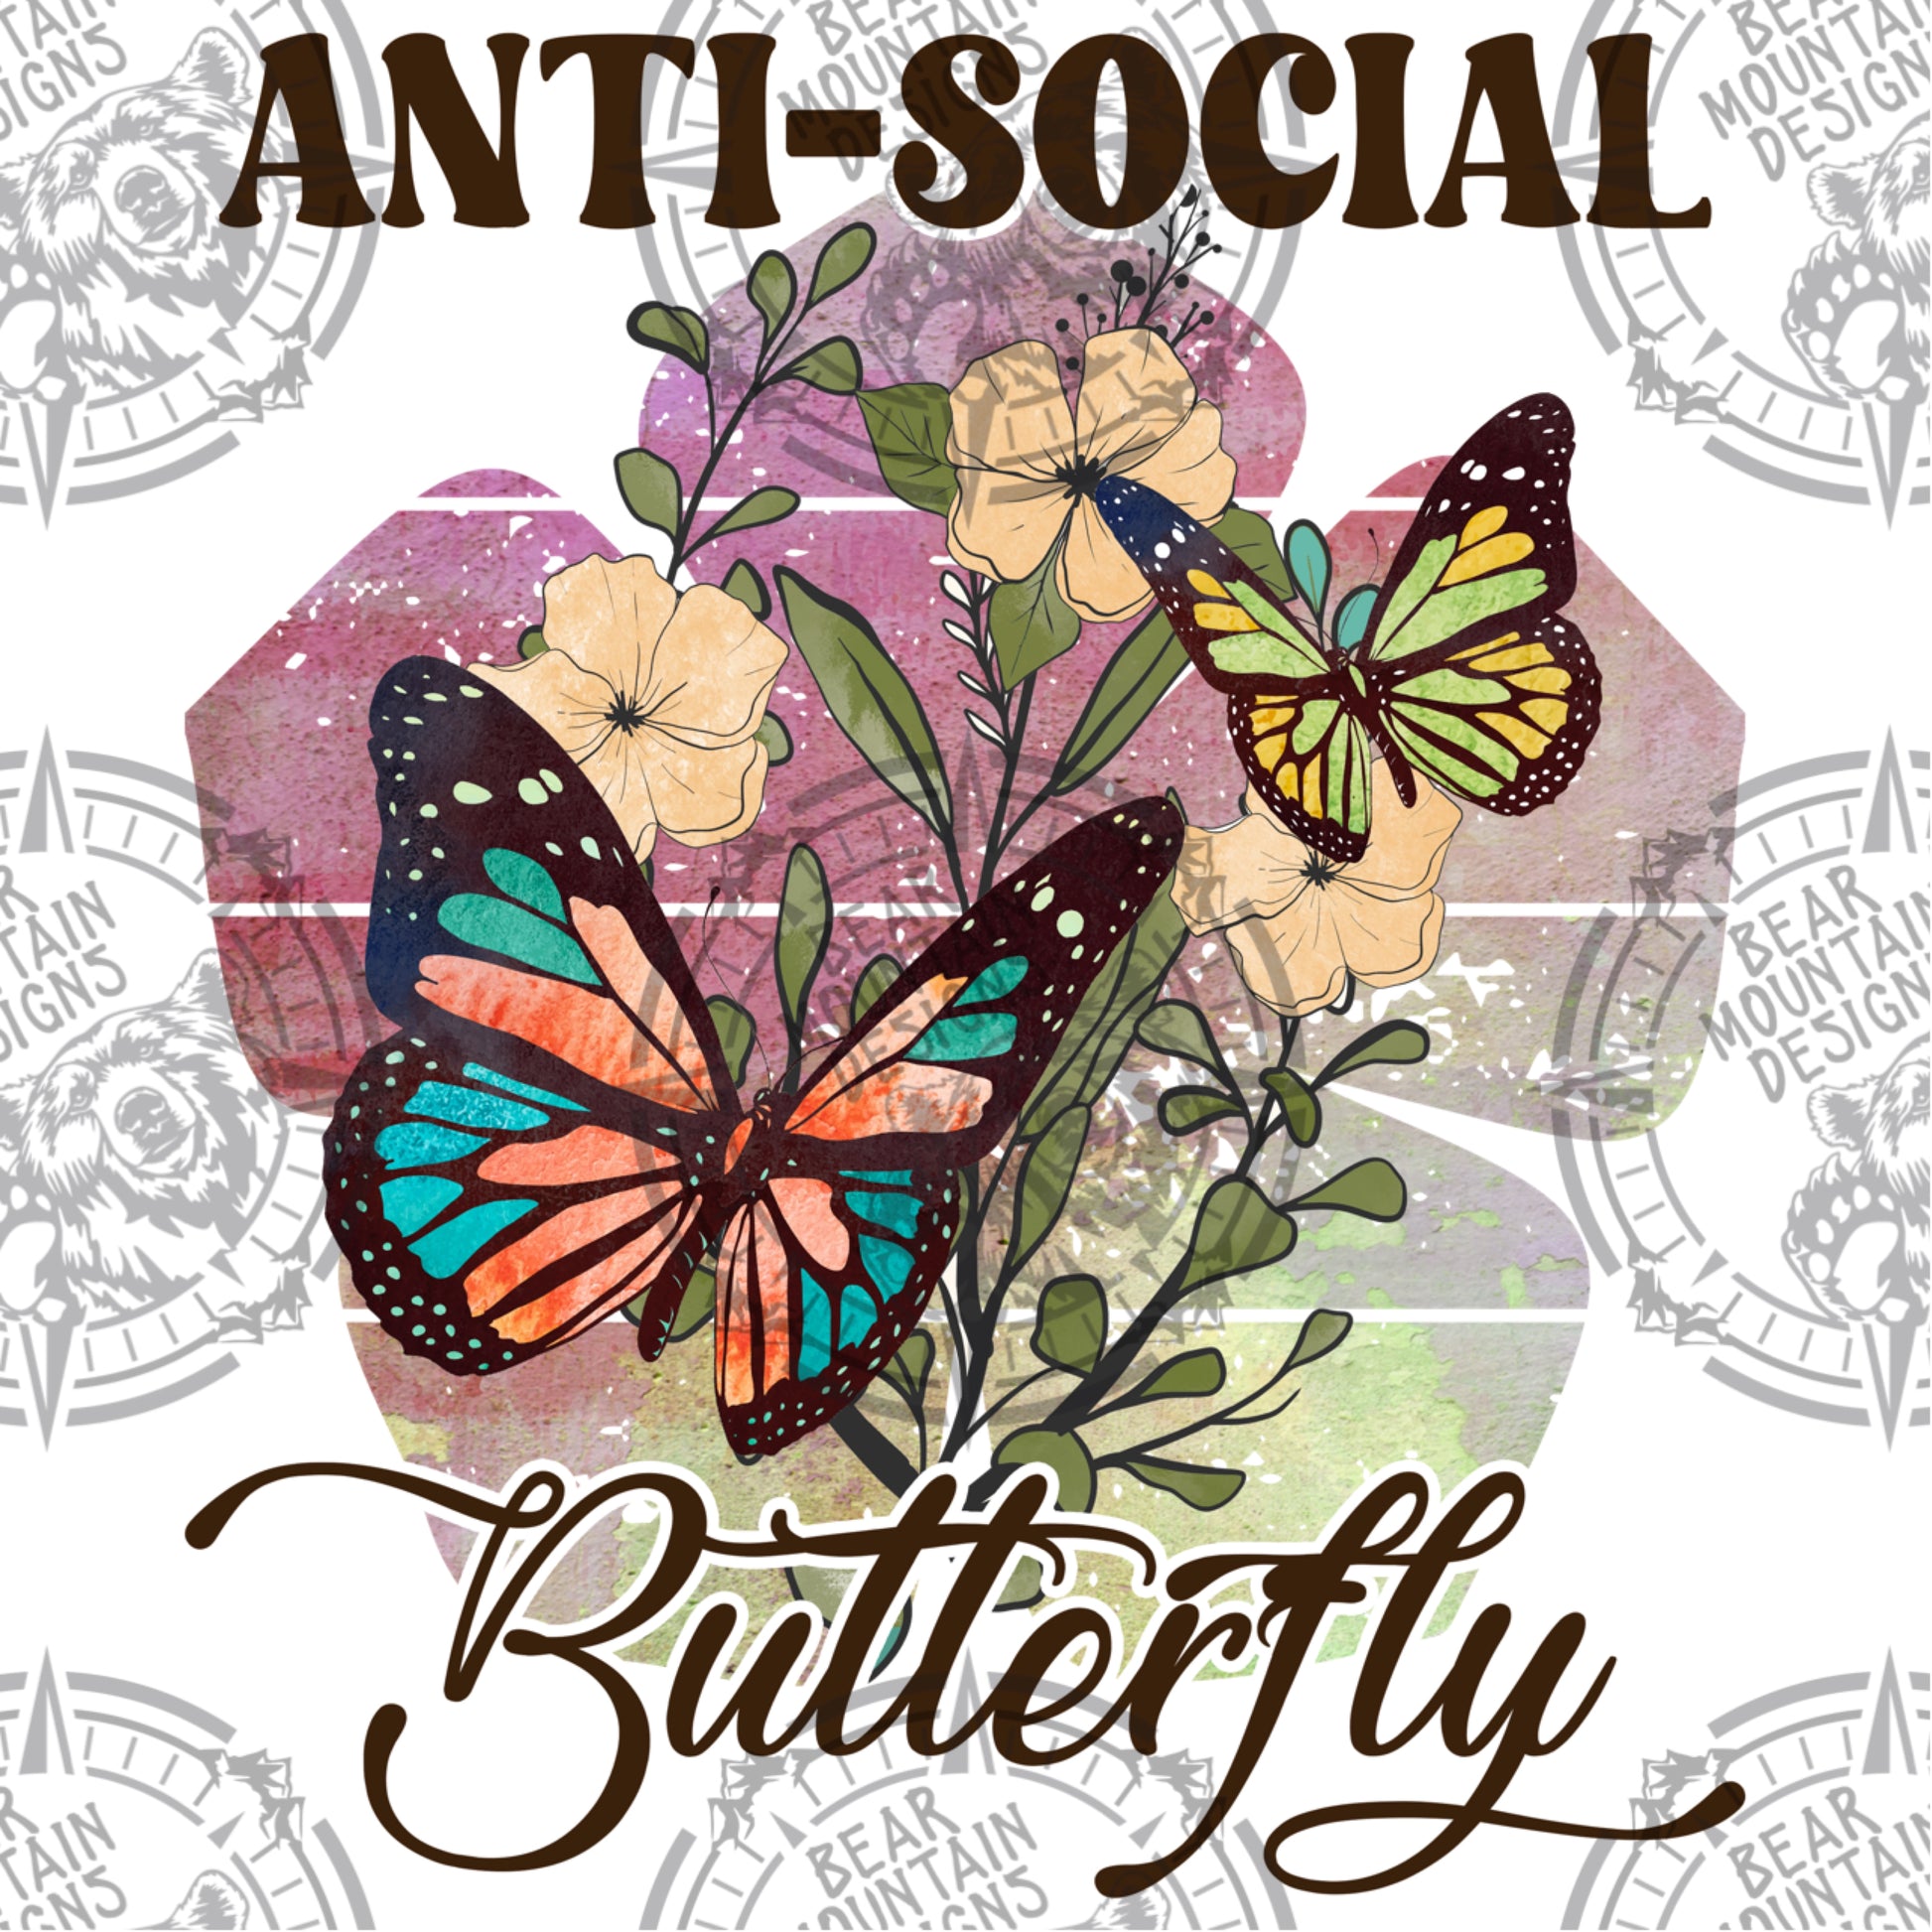 Antisocial Butterfly Sticker